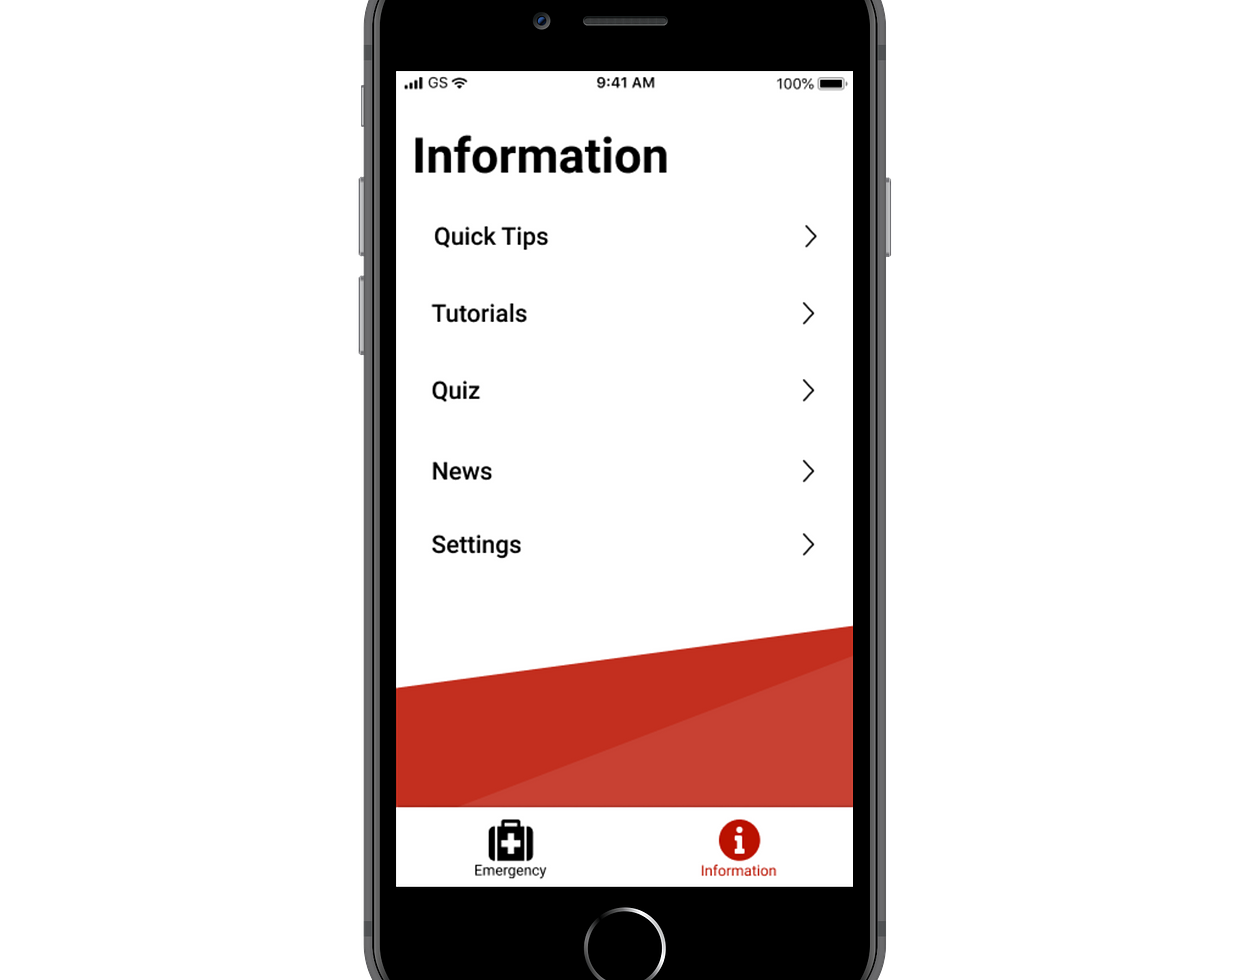 The information tab provides the user with tips, tutorials, quizzes, news and settings.